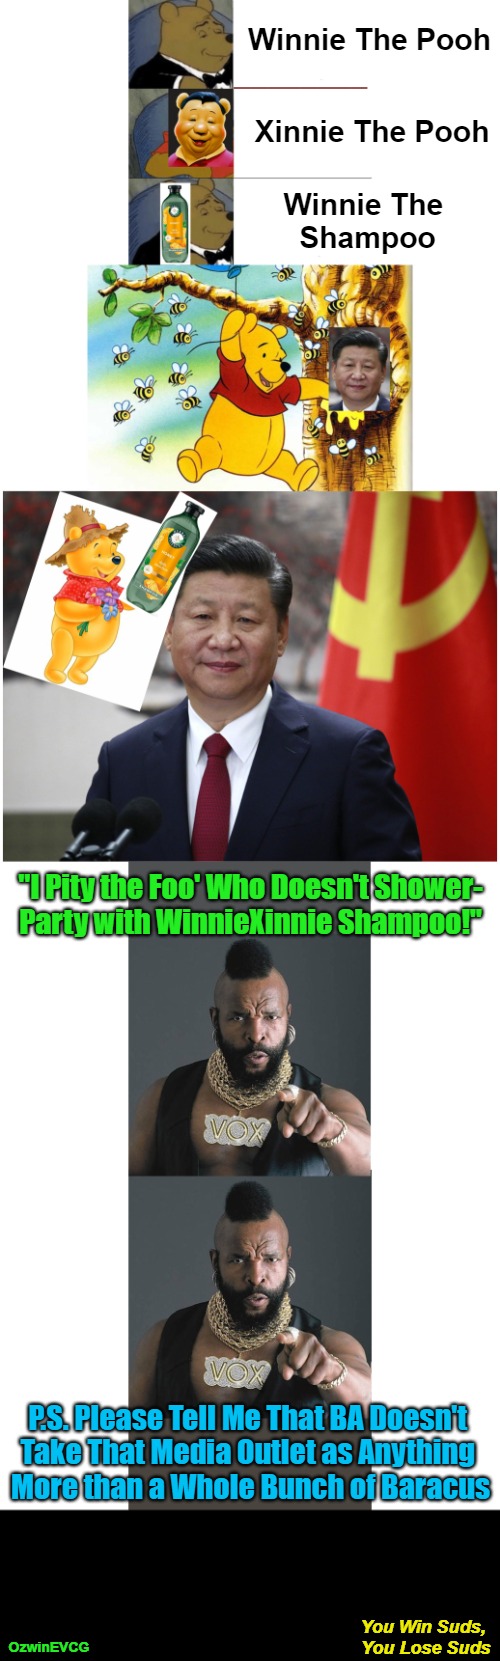 You Win Suds, You Lose Suds [NV] | Winnie The Pooh; ________; Xinnie The Pooh; Winnie The 

Shampoo; "I Pity the Foo' Who Doesn't Shower-

Party with WinnieXinnie Shampoo!"; P.S. Please Tell Me That BA Doesn't 

Take That Media Outlet as Anything 

More than a Whole Bunch of Baracus; You Win Suds, 

You Lose Suds; OzwinEVCG | image tagged in xi jinping,winnie the pooh,truly organic experiences,xinnie the pooh,golden showers,pity the fool | made w/ Imgflip meme maker